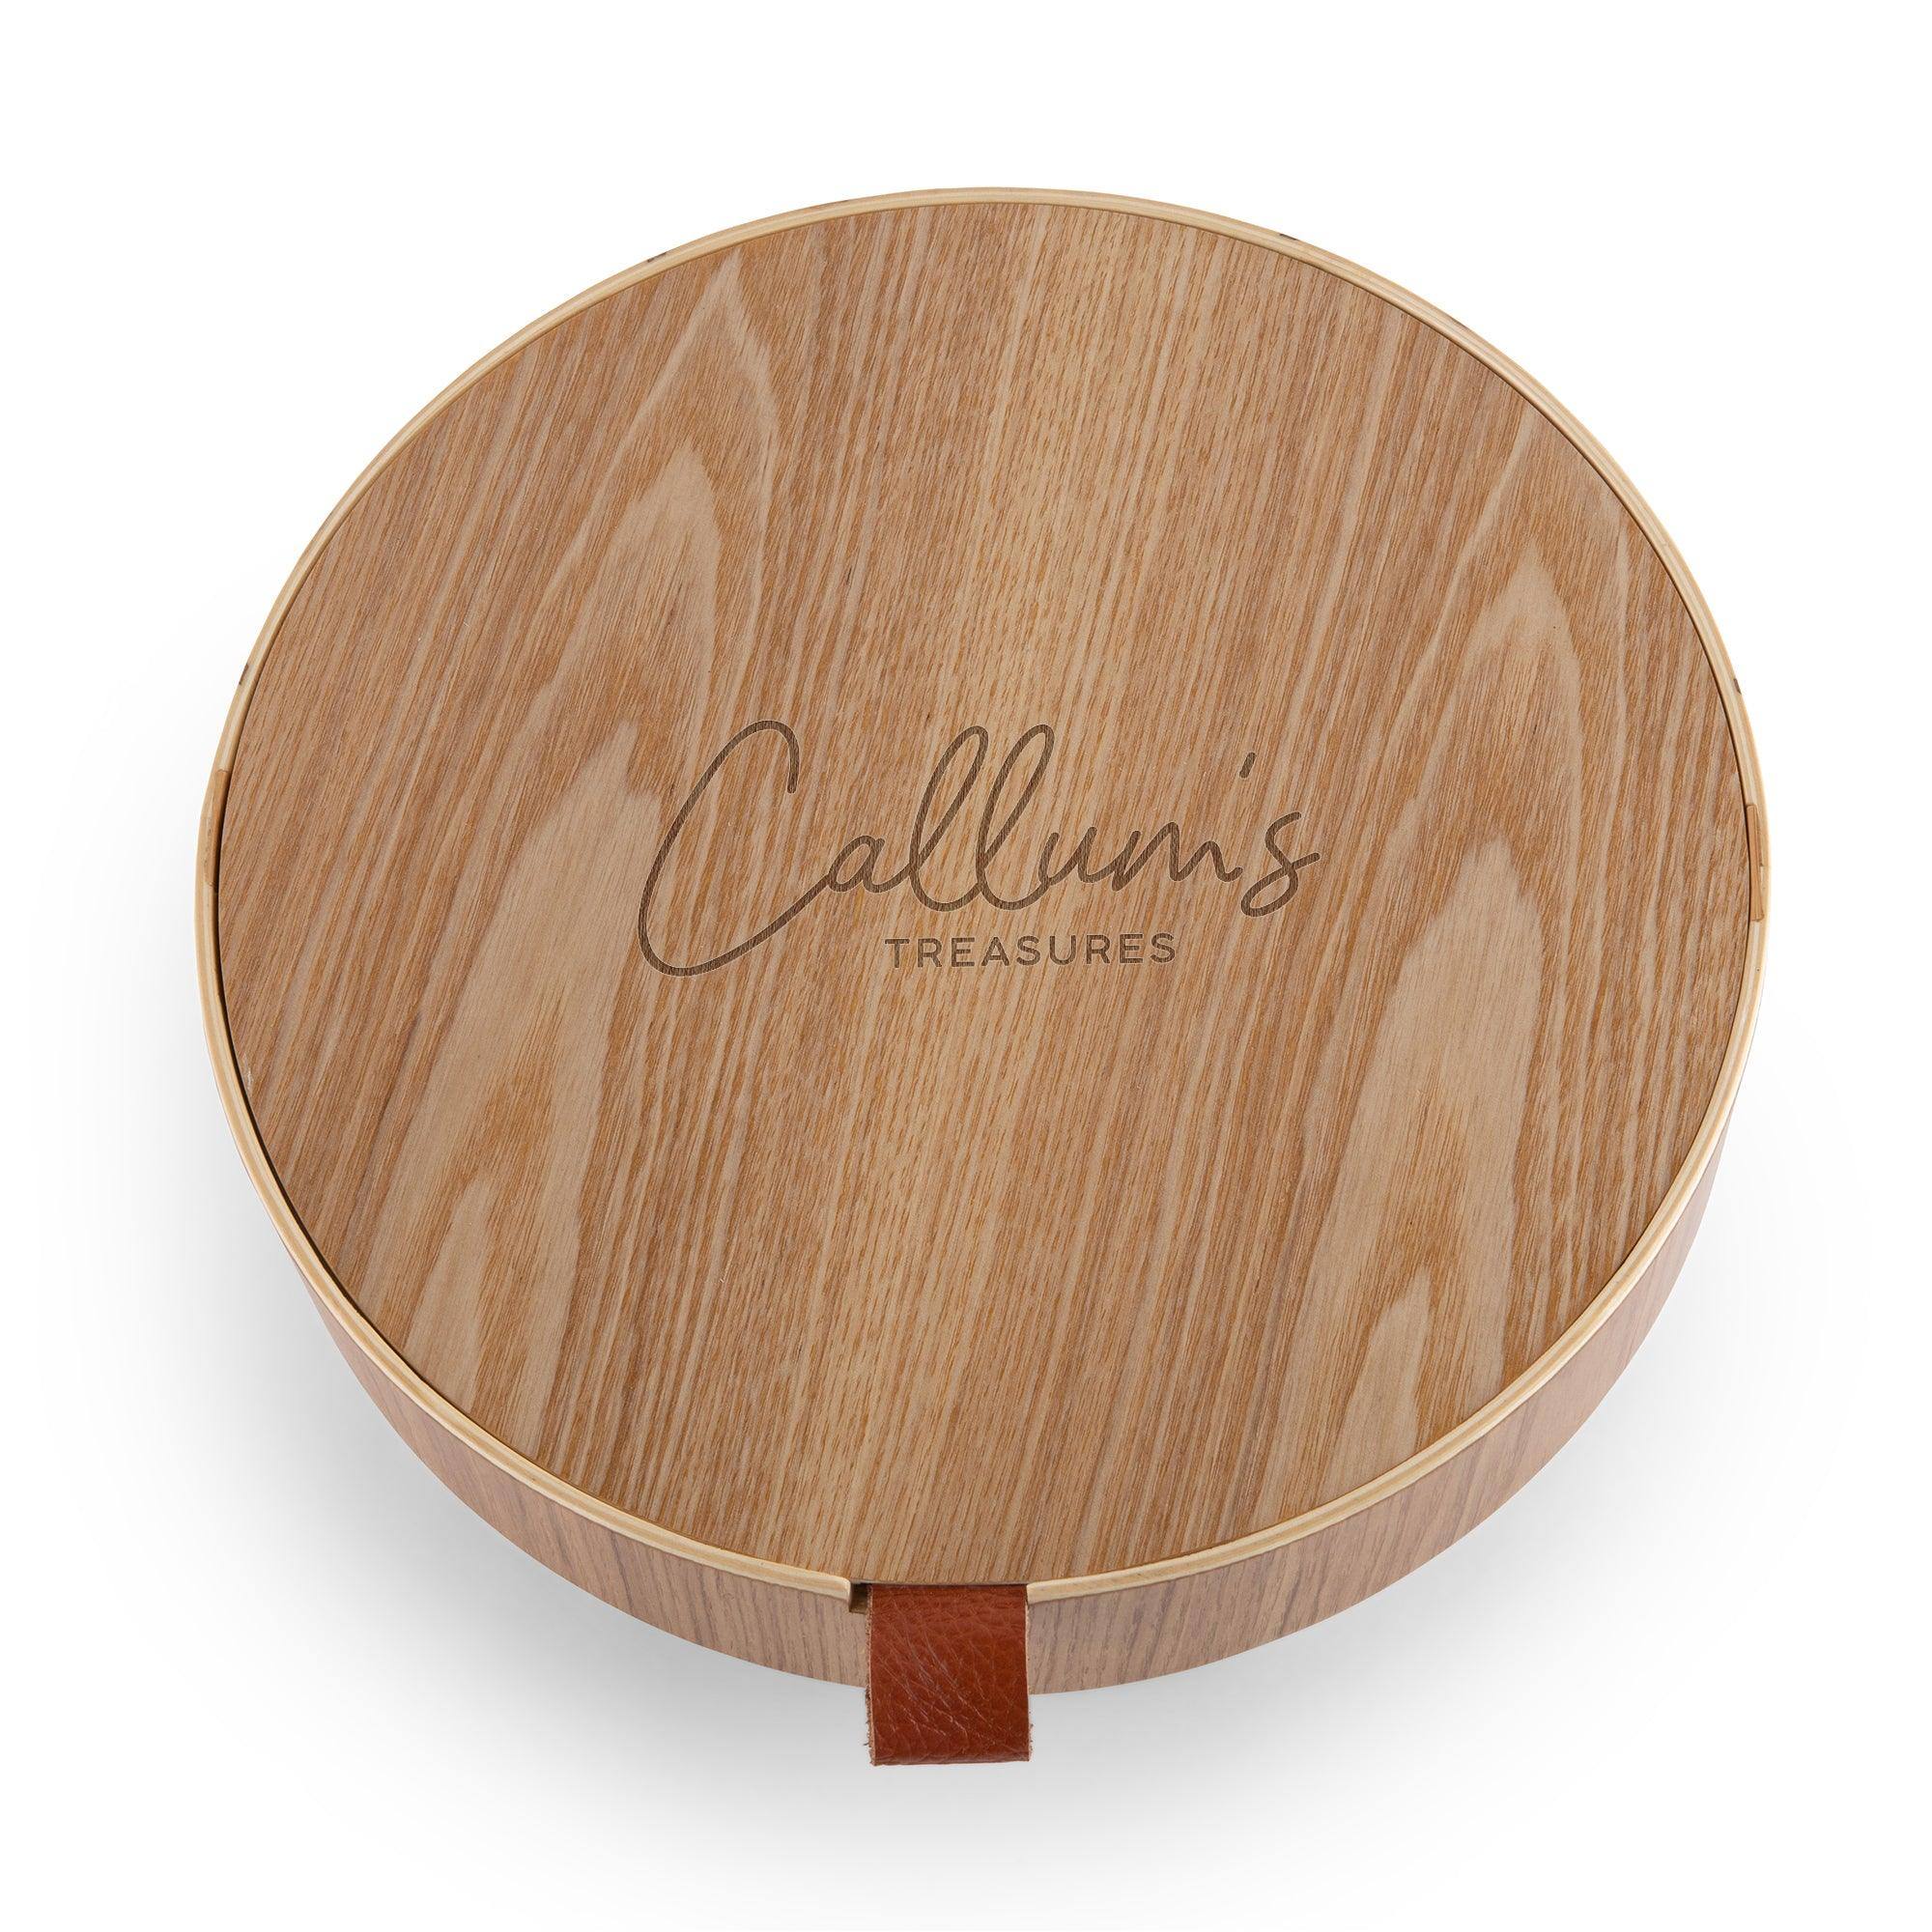 Personalised Wooden Jewellery Box For Men - Dustandthings.com